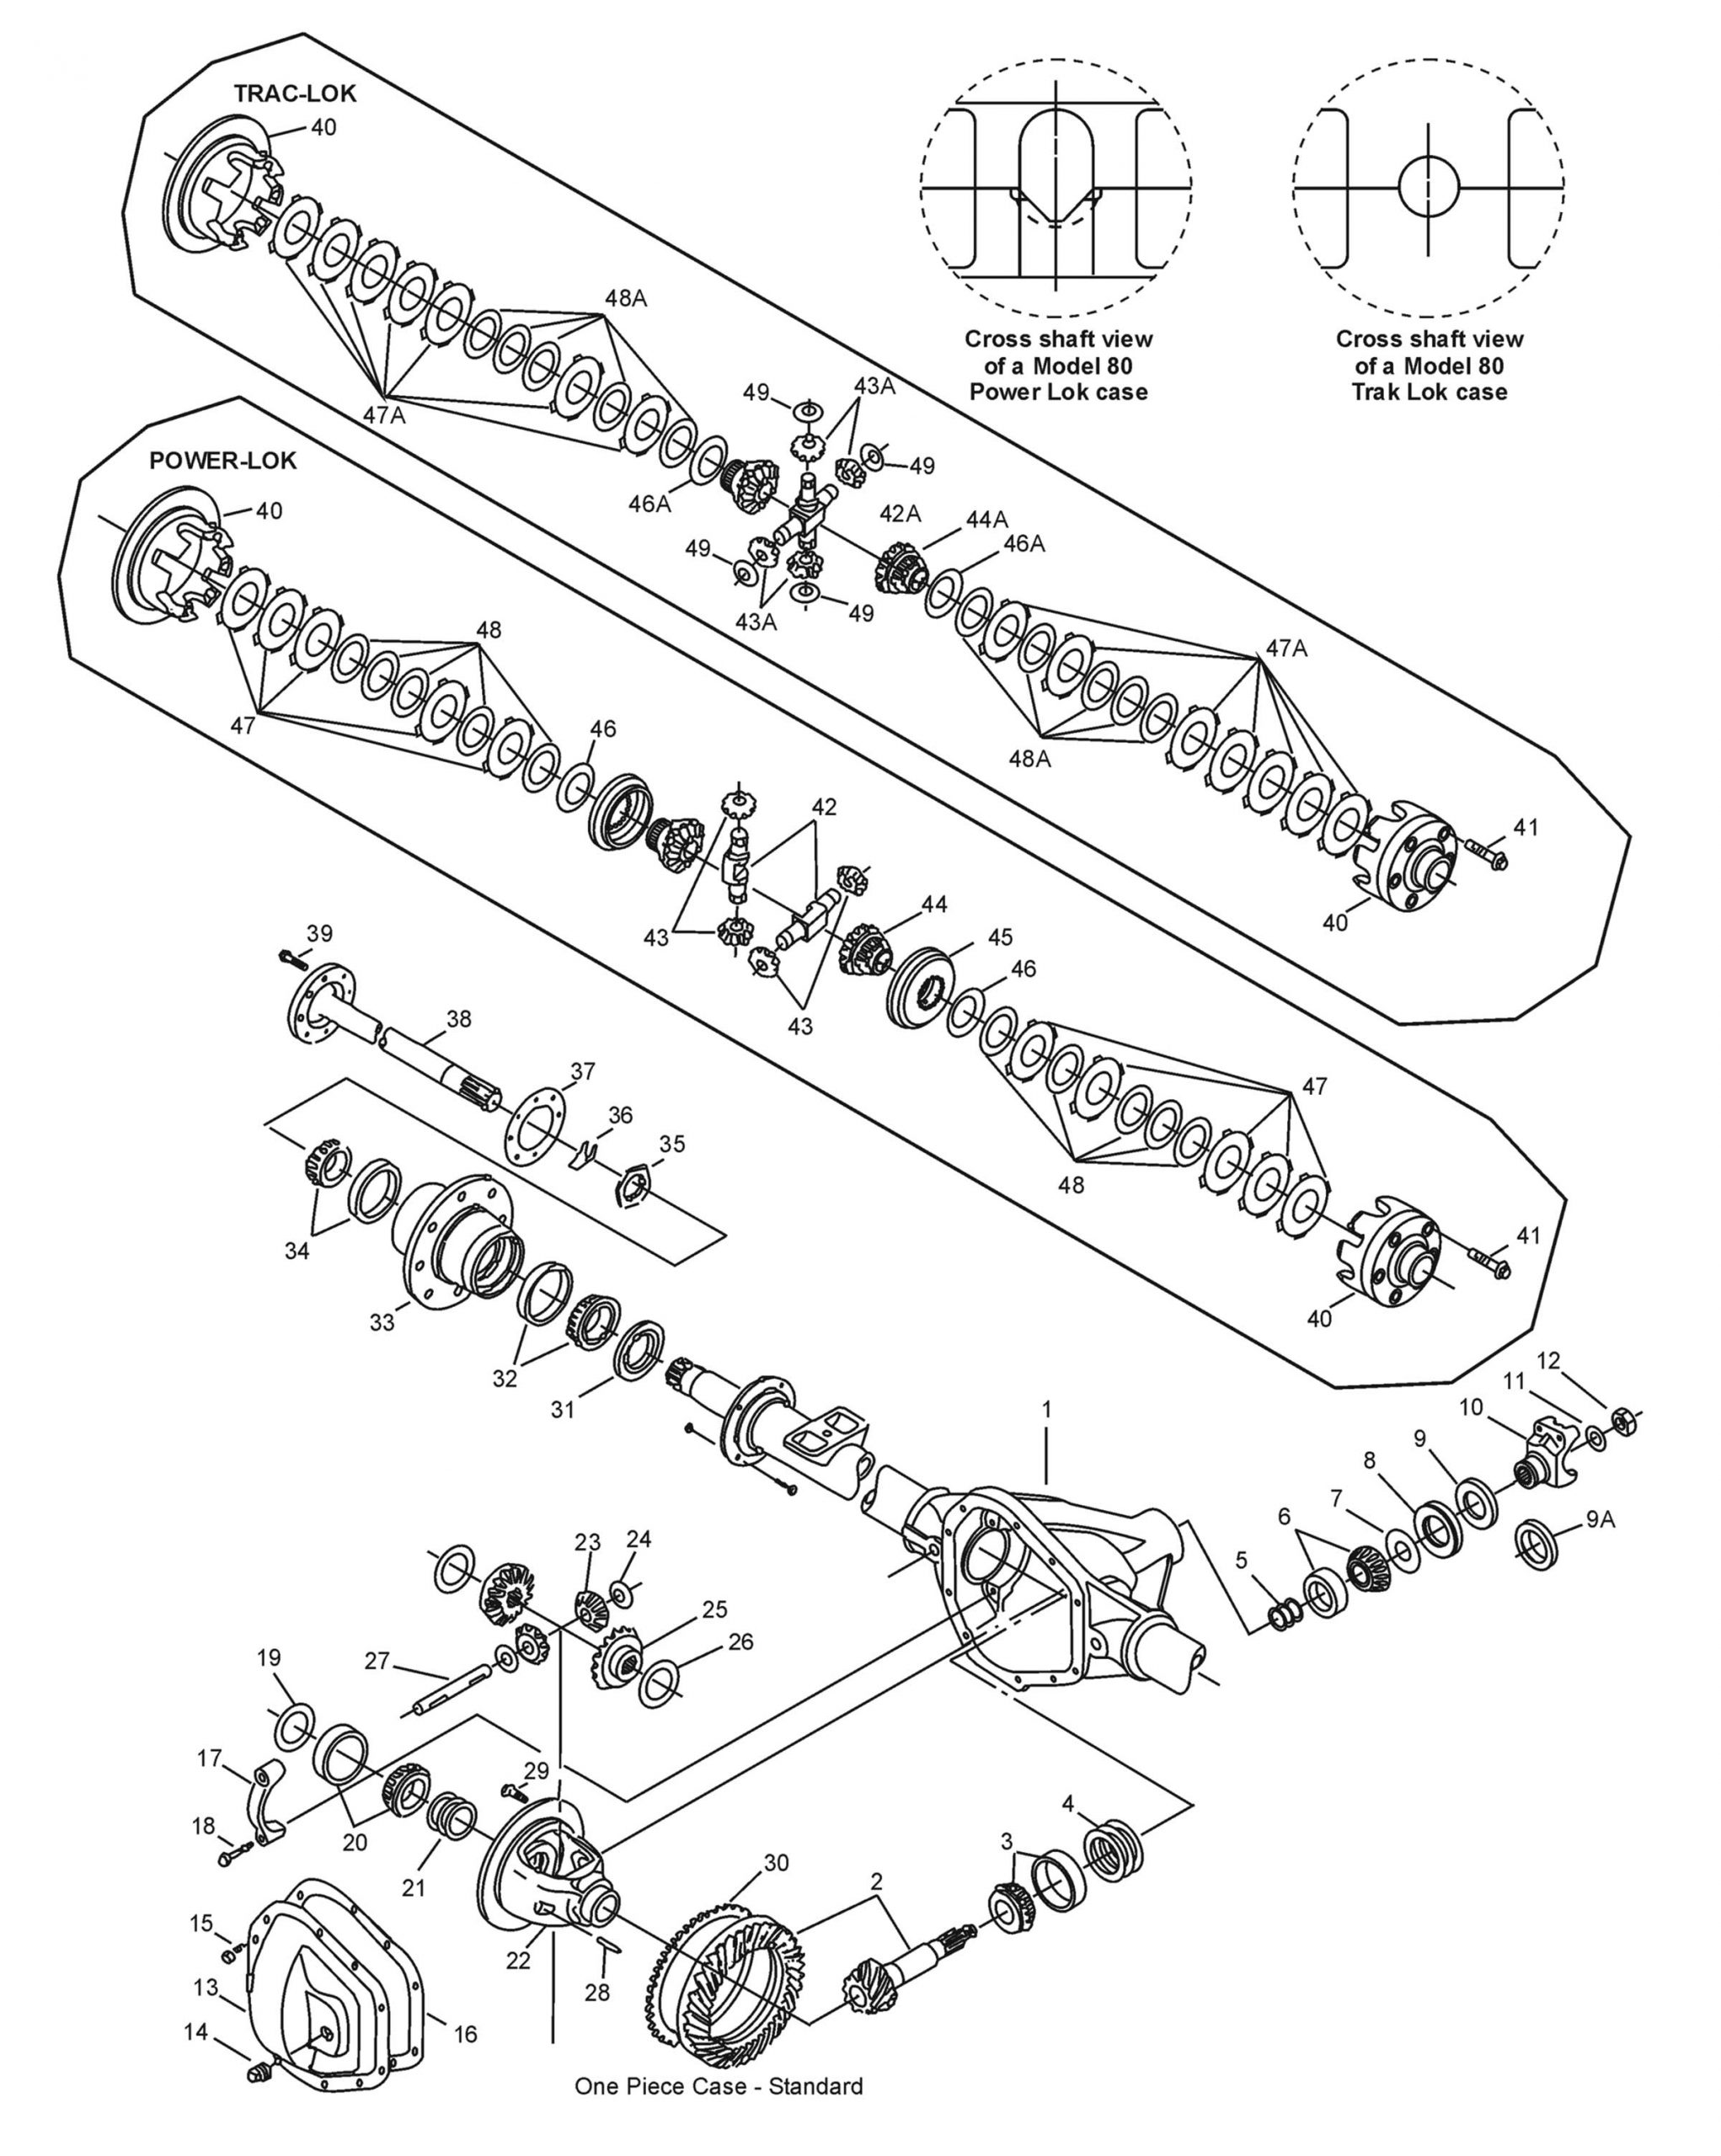 Dana 80 Axle Assembly - Exploded View and Parts Diagram